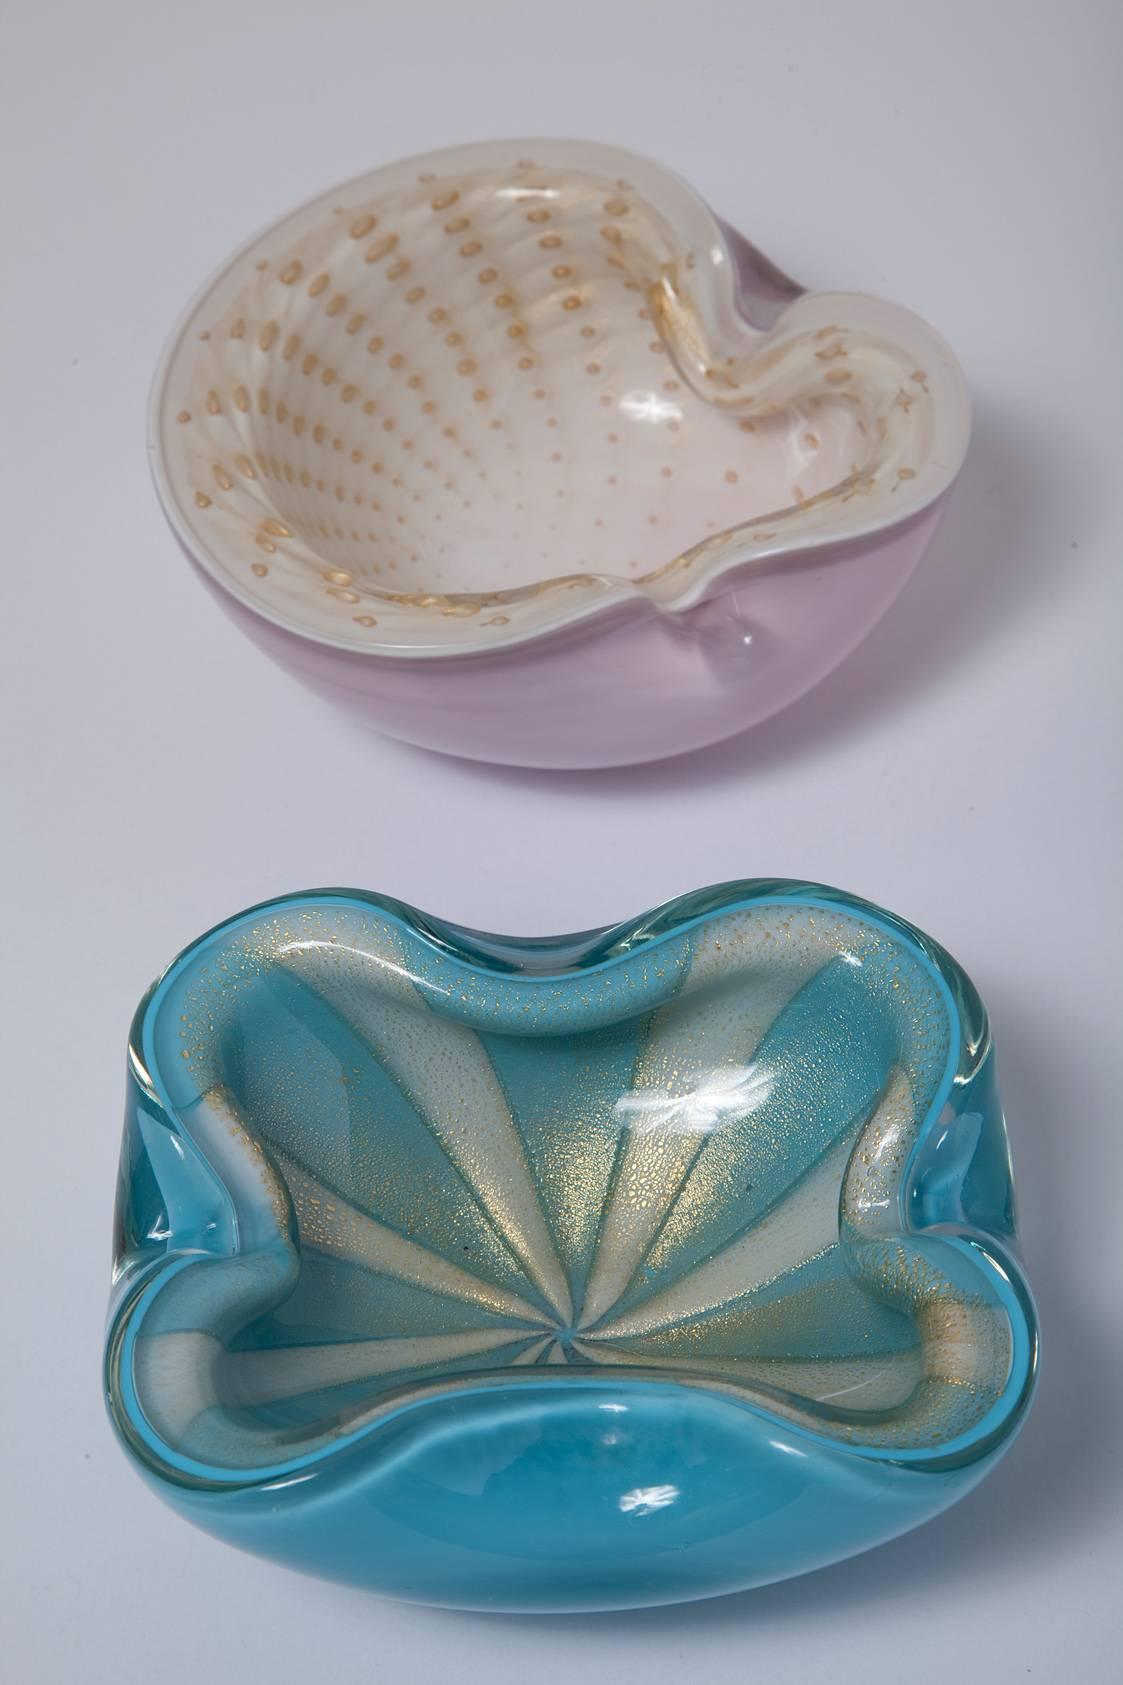 The pink Murano piece is sold. The second Barbini bowl is gold-dusted Murano glass with a blue and white circus tent pattern and measures H 2.25in. x W 6in. x D 5in. We love it as a serving piece for nuts or candies, or as a bedside vide poche.